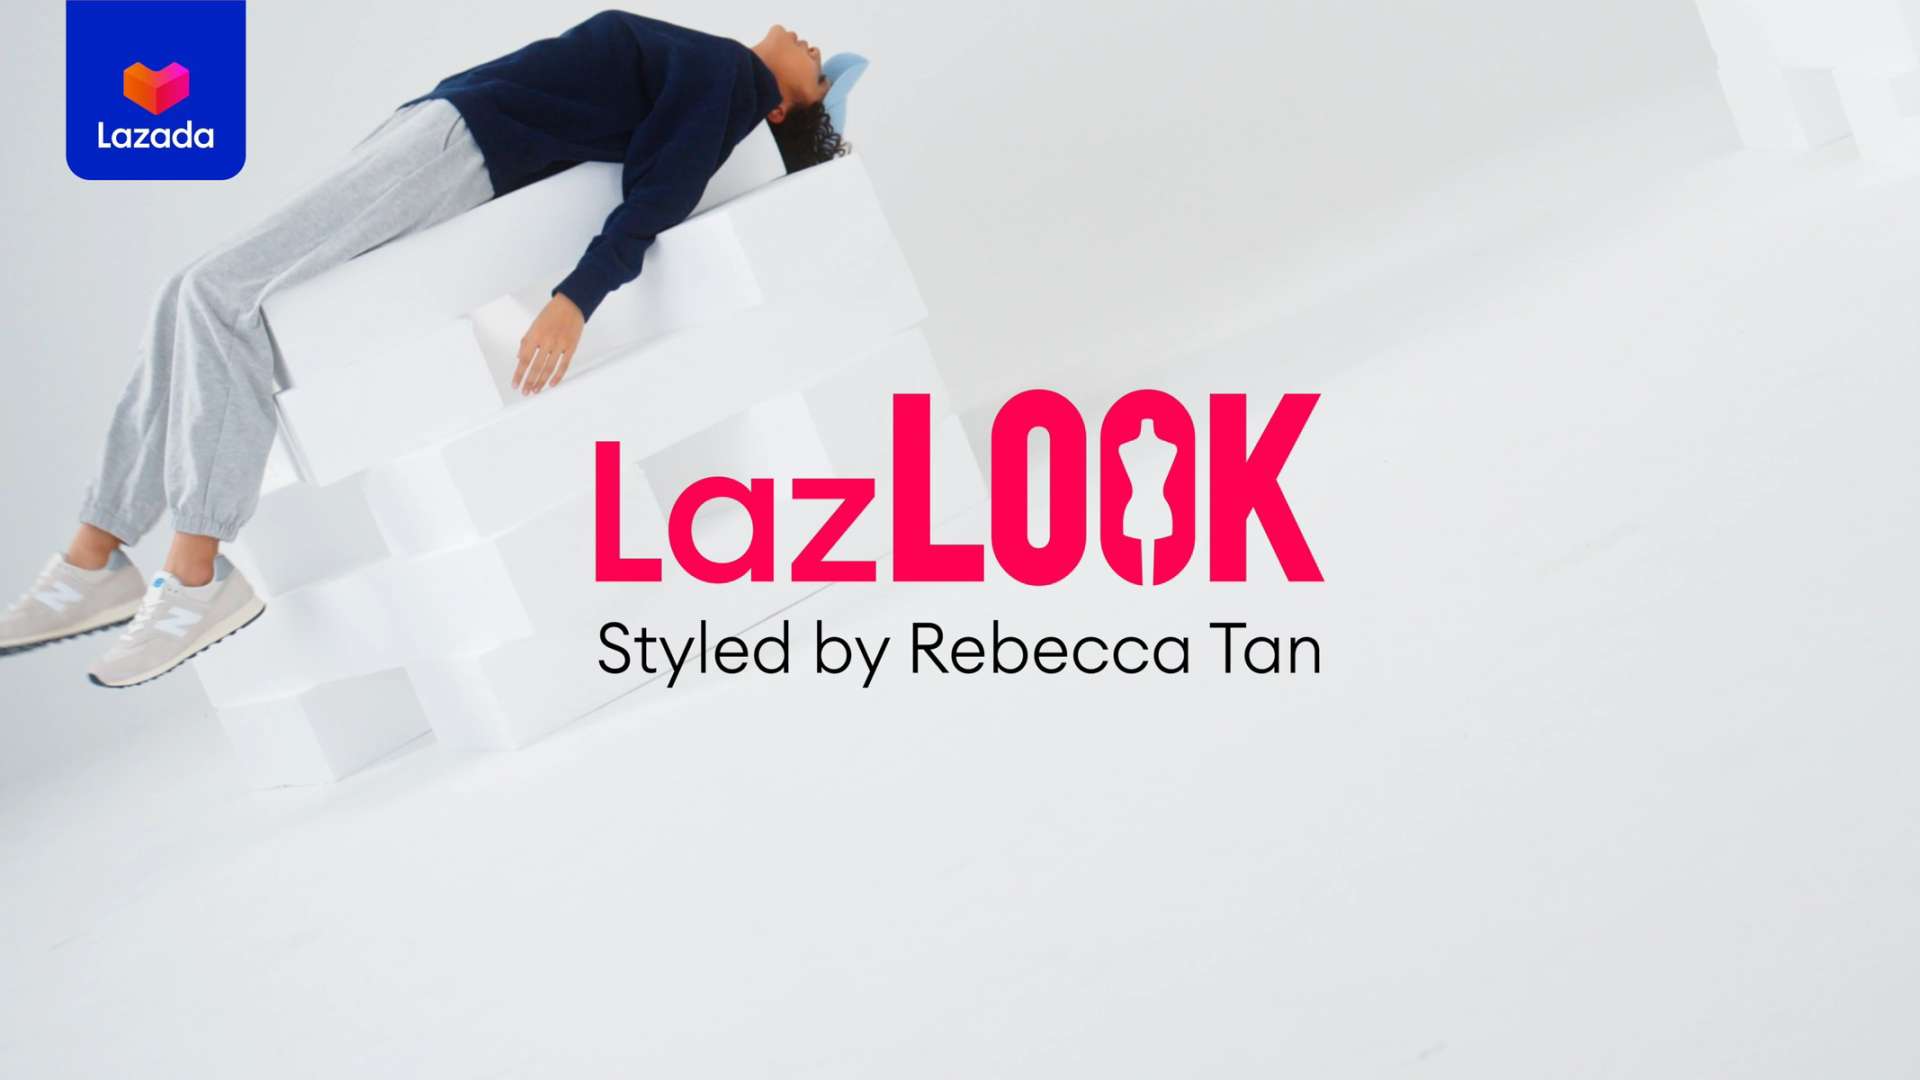 Lazlook Singapore Styled by Rebecca Tan